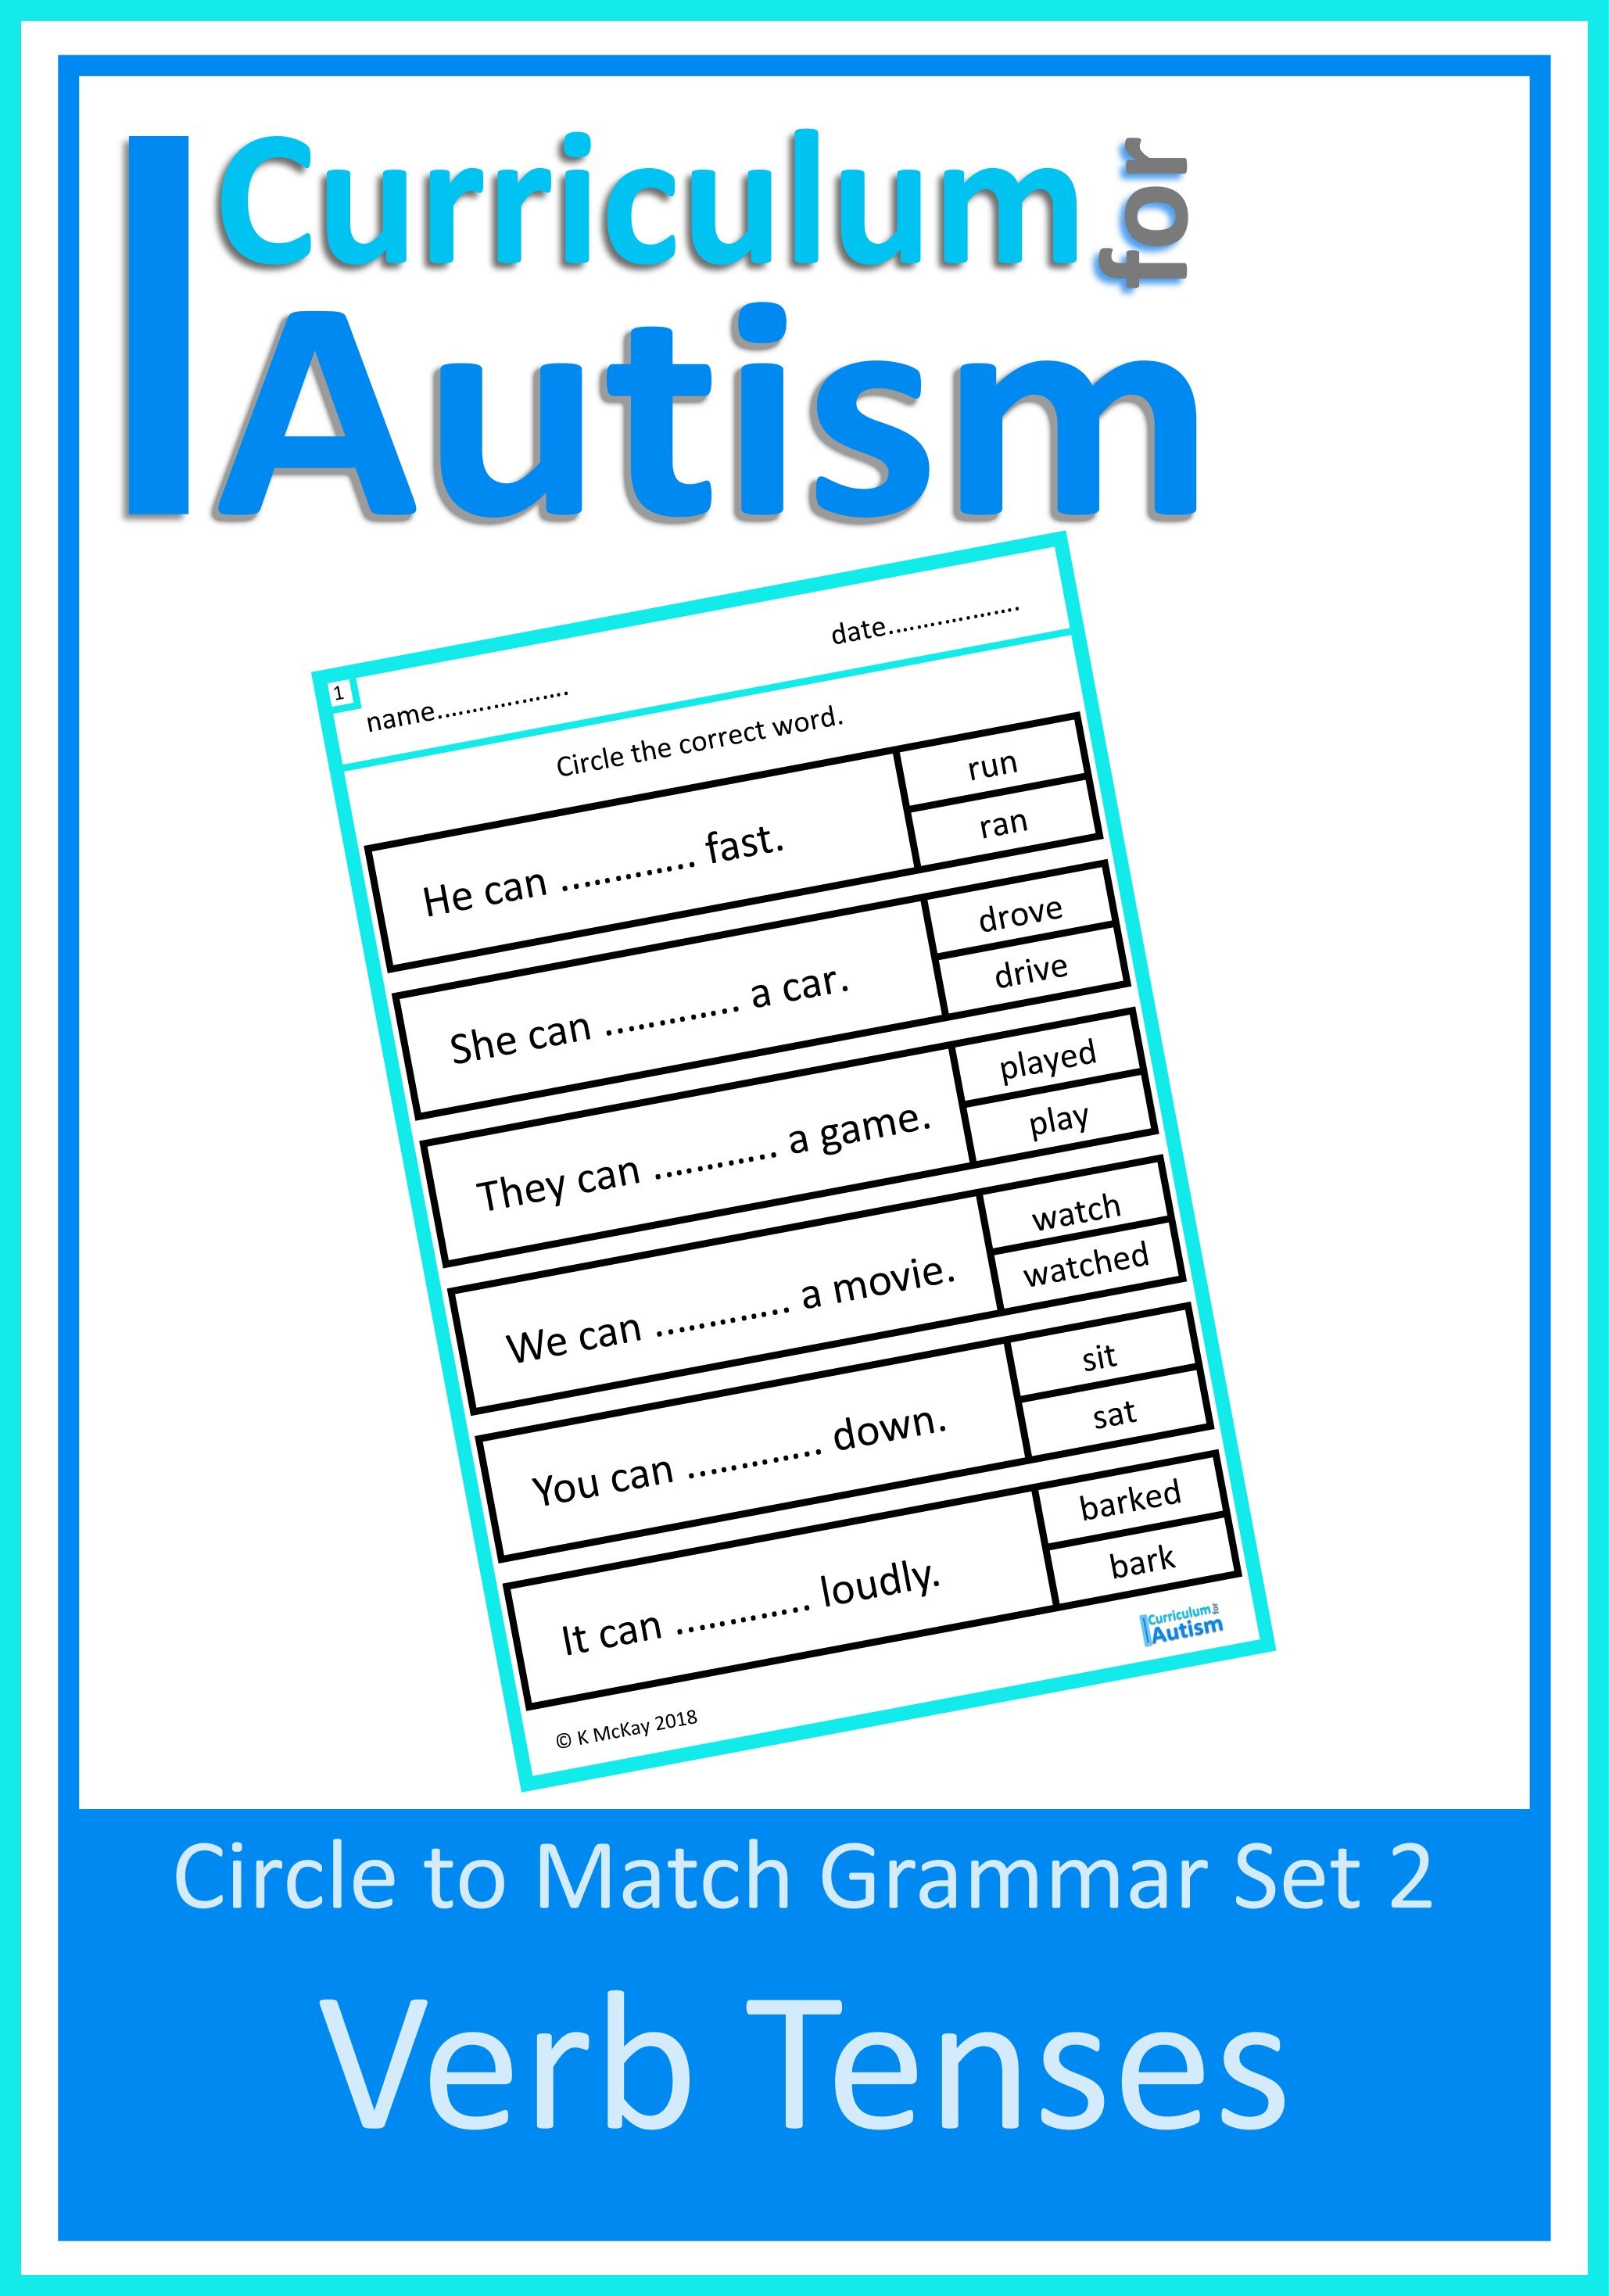 read-aloud-fluency-sentence-strips-reptiles-autism-special-education-class-resource-room